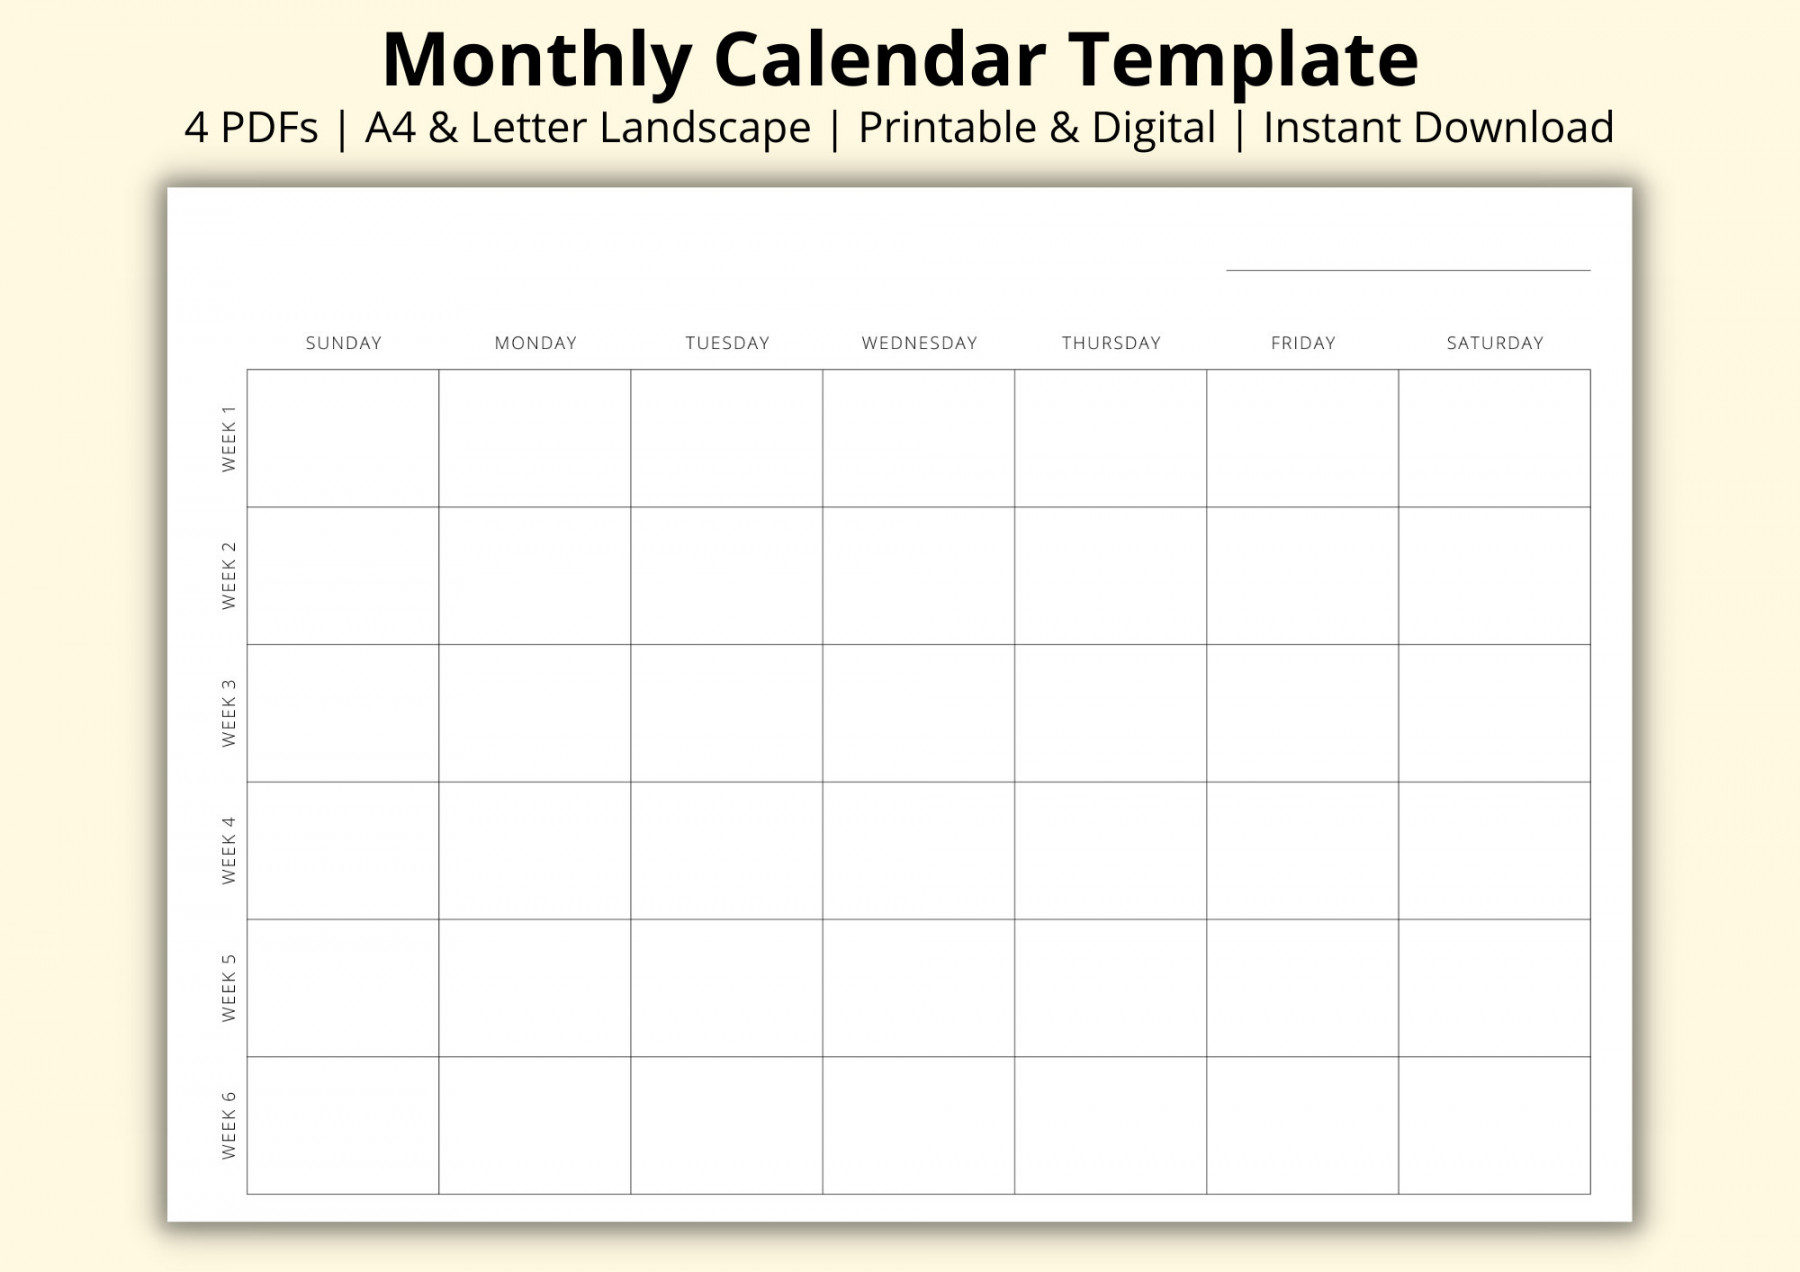 Monthly Calendar Template Blank Calendar Page Undated - Etsy